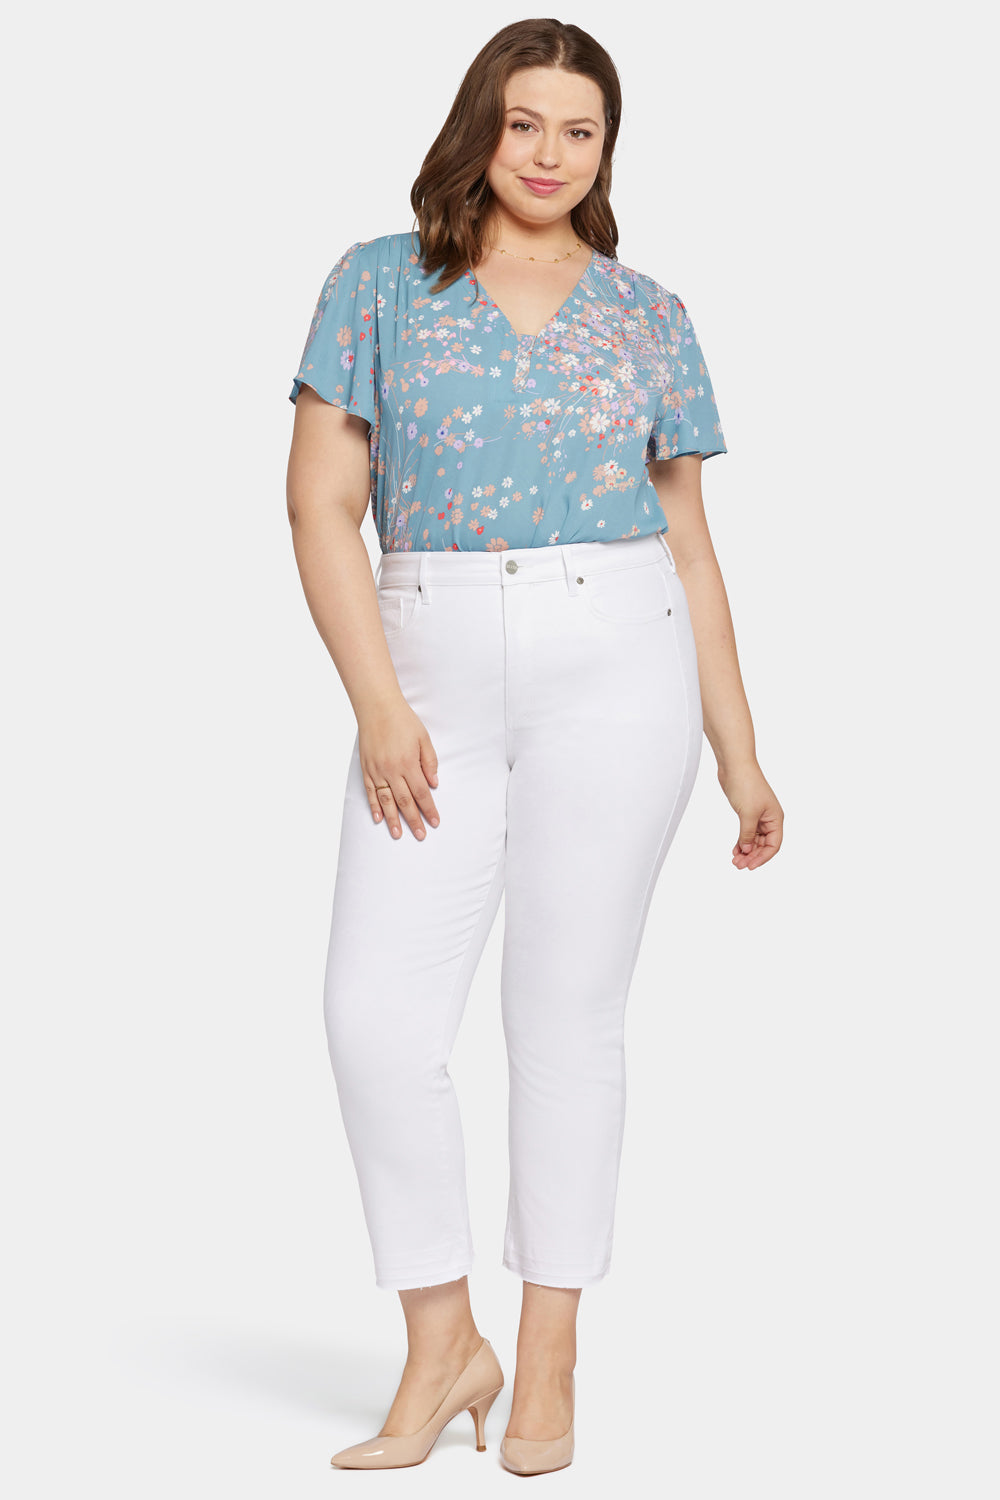 NYDJ Marilyn Straight Ankle Jeans In Petite Plus Size In Cool Embrace® Denim With High Rise And Released Hems - Optic White